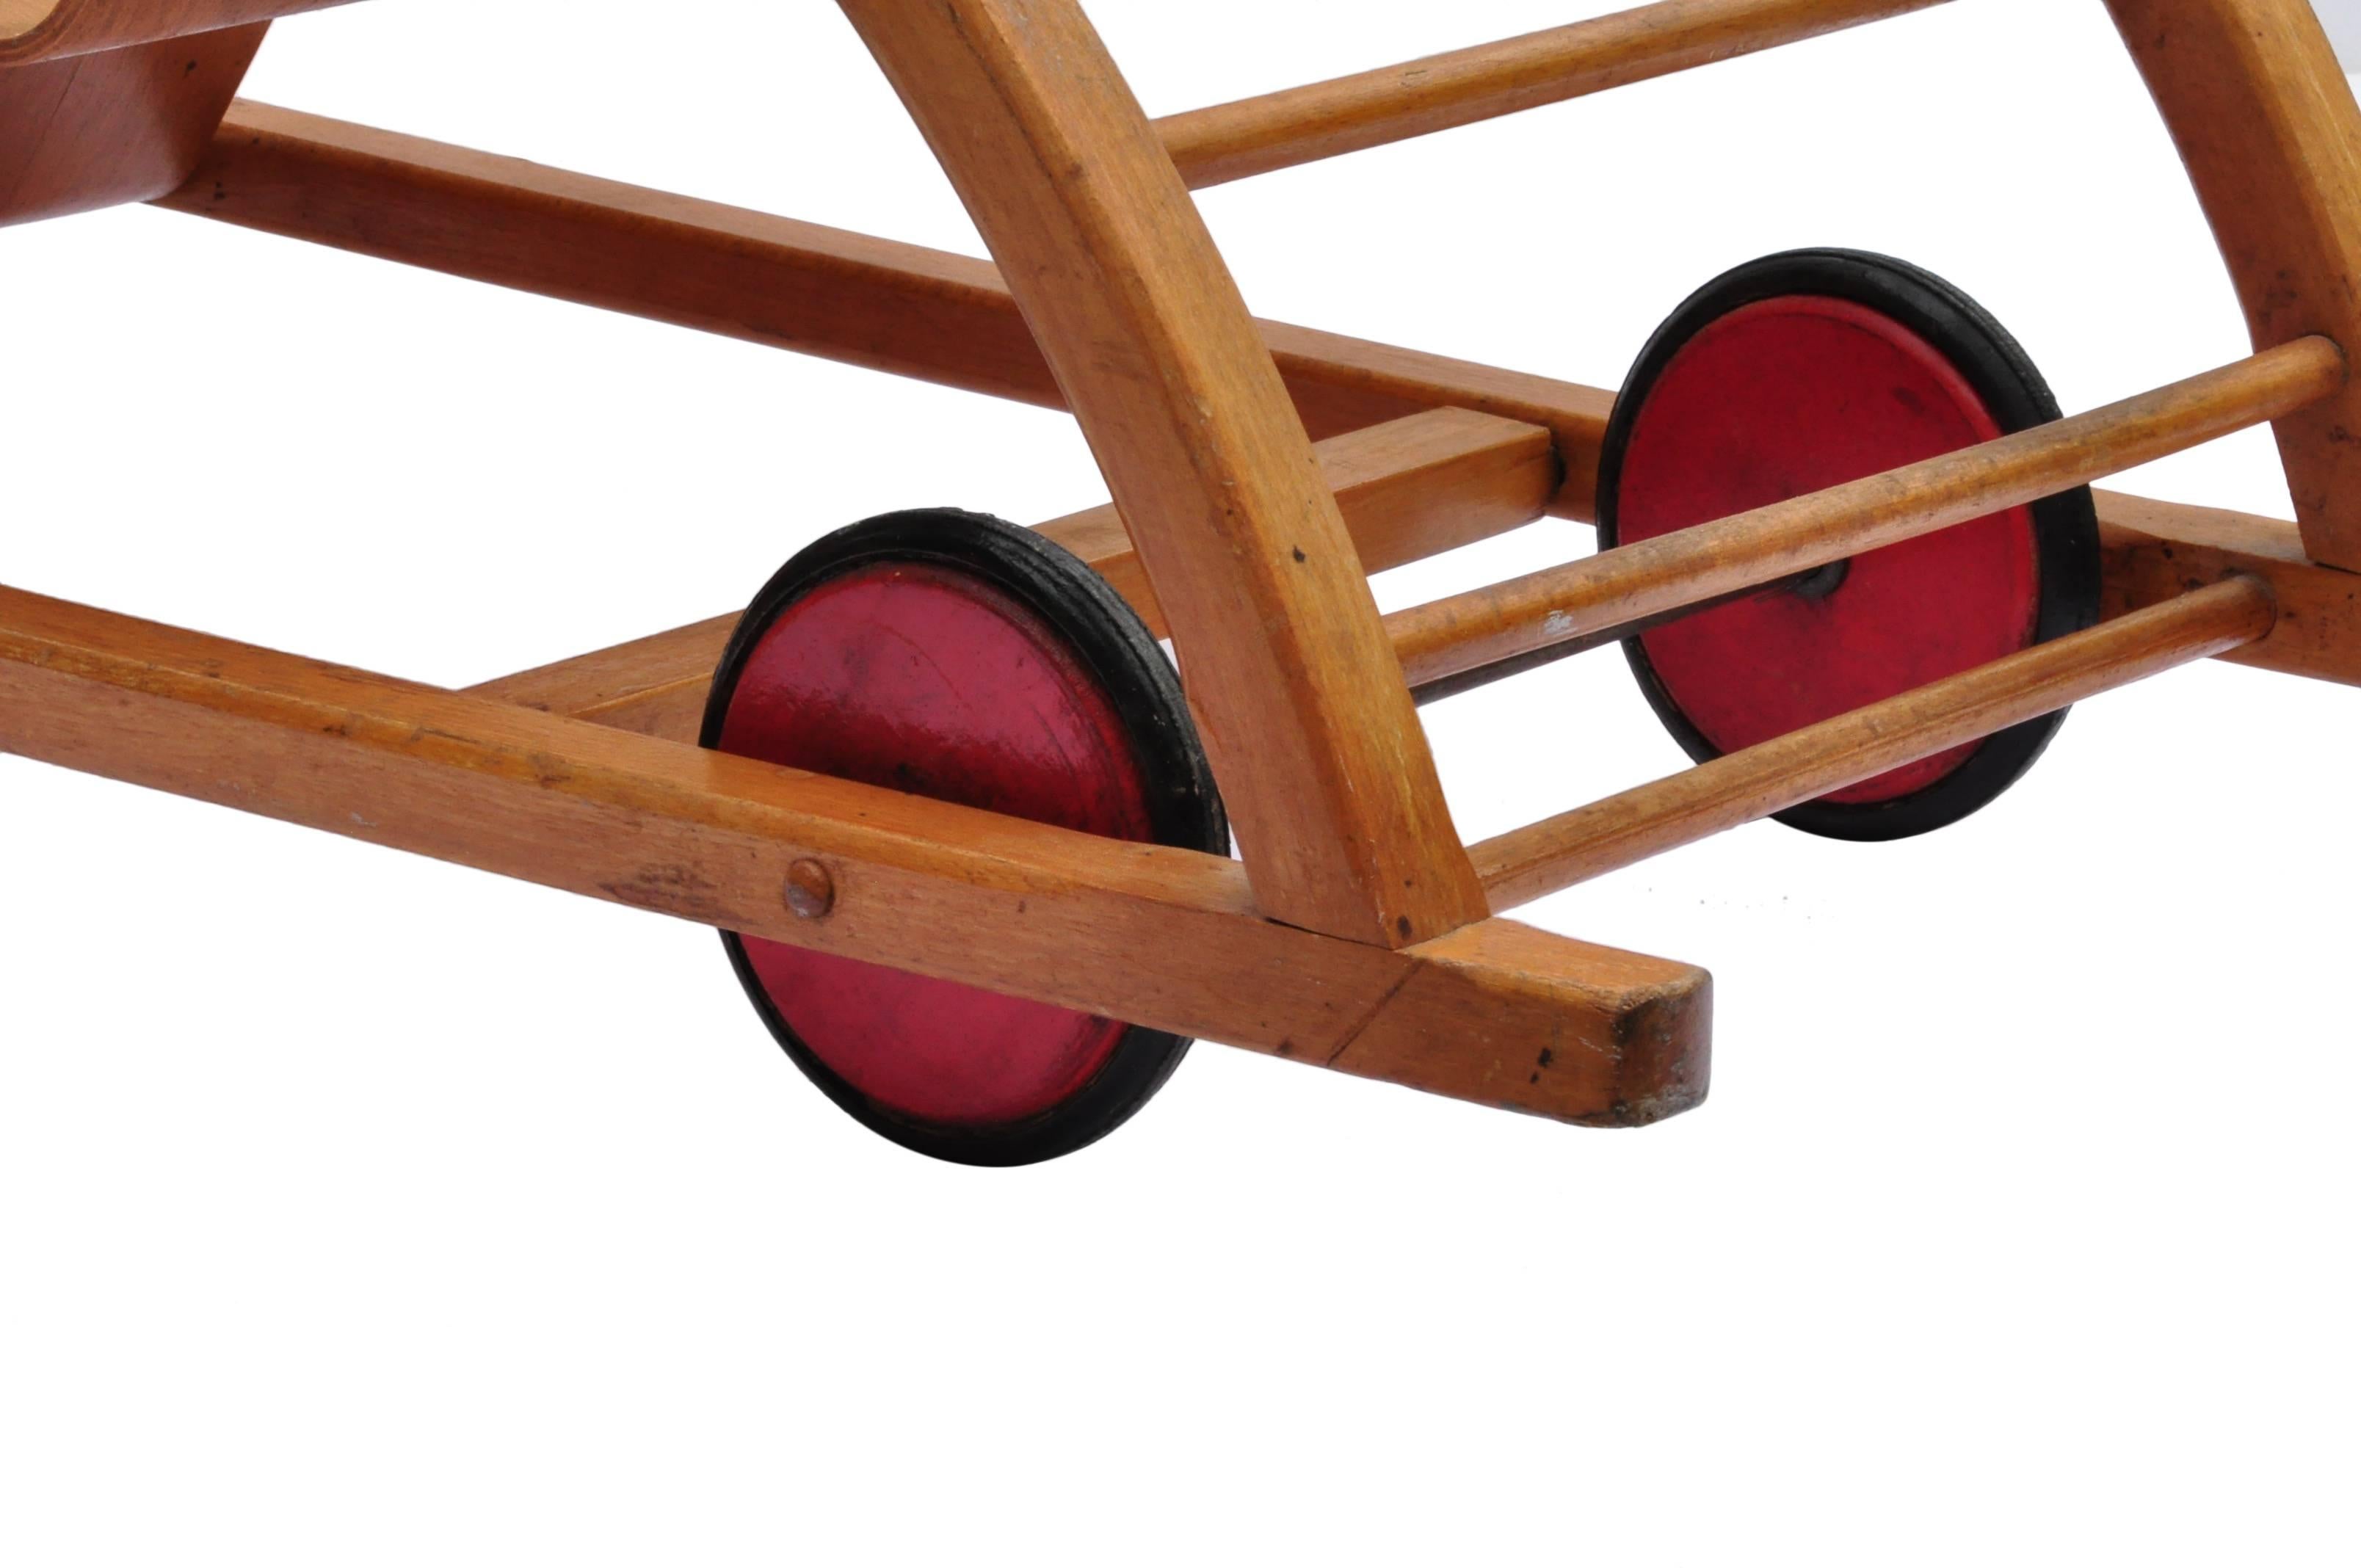 Laminated Childs Swing Cart, Germany, 1956 For Sale